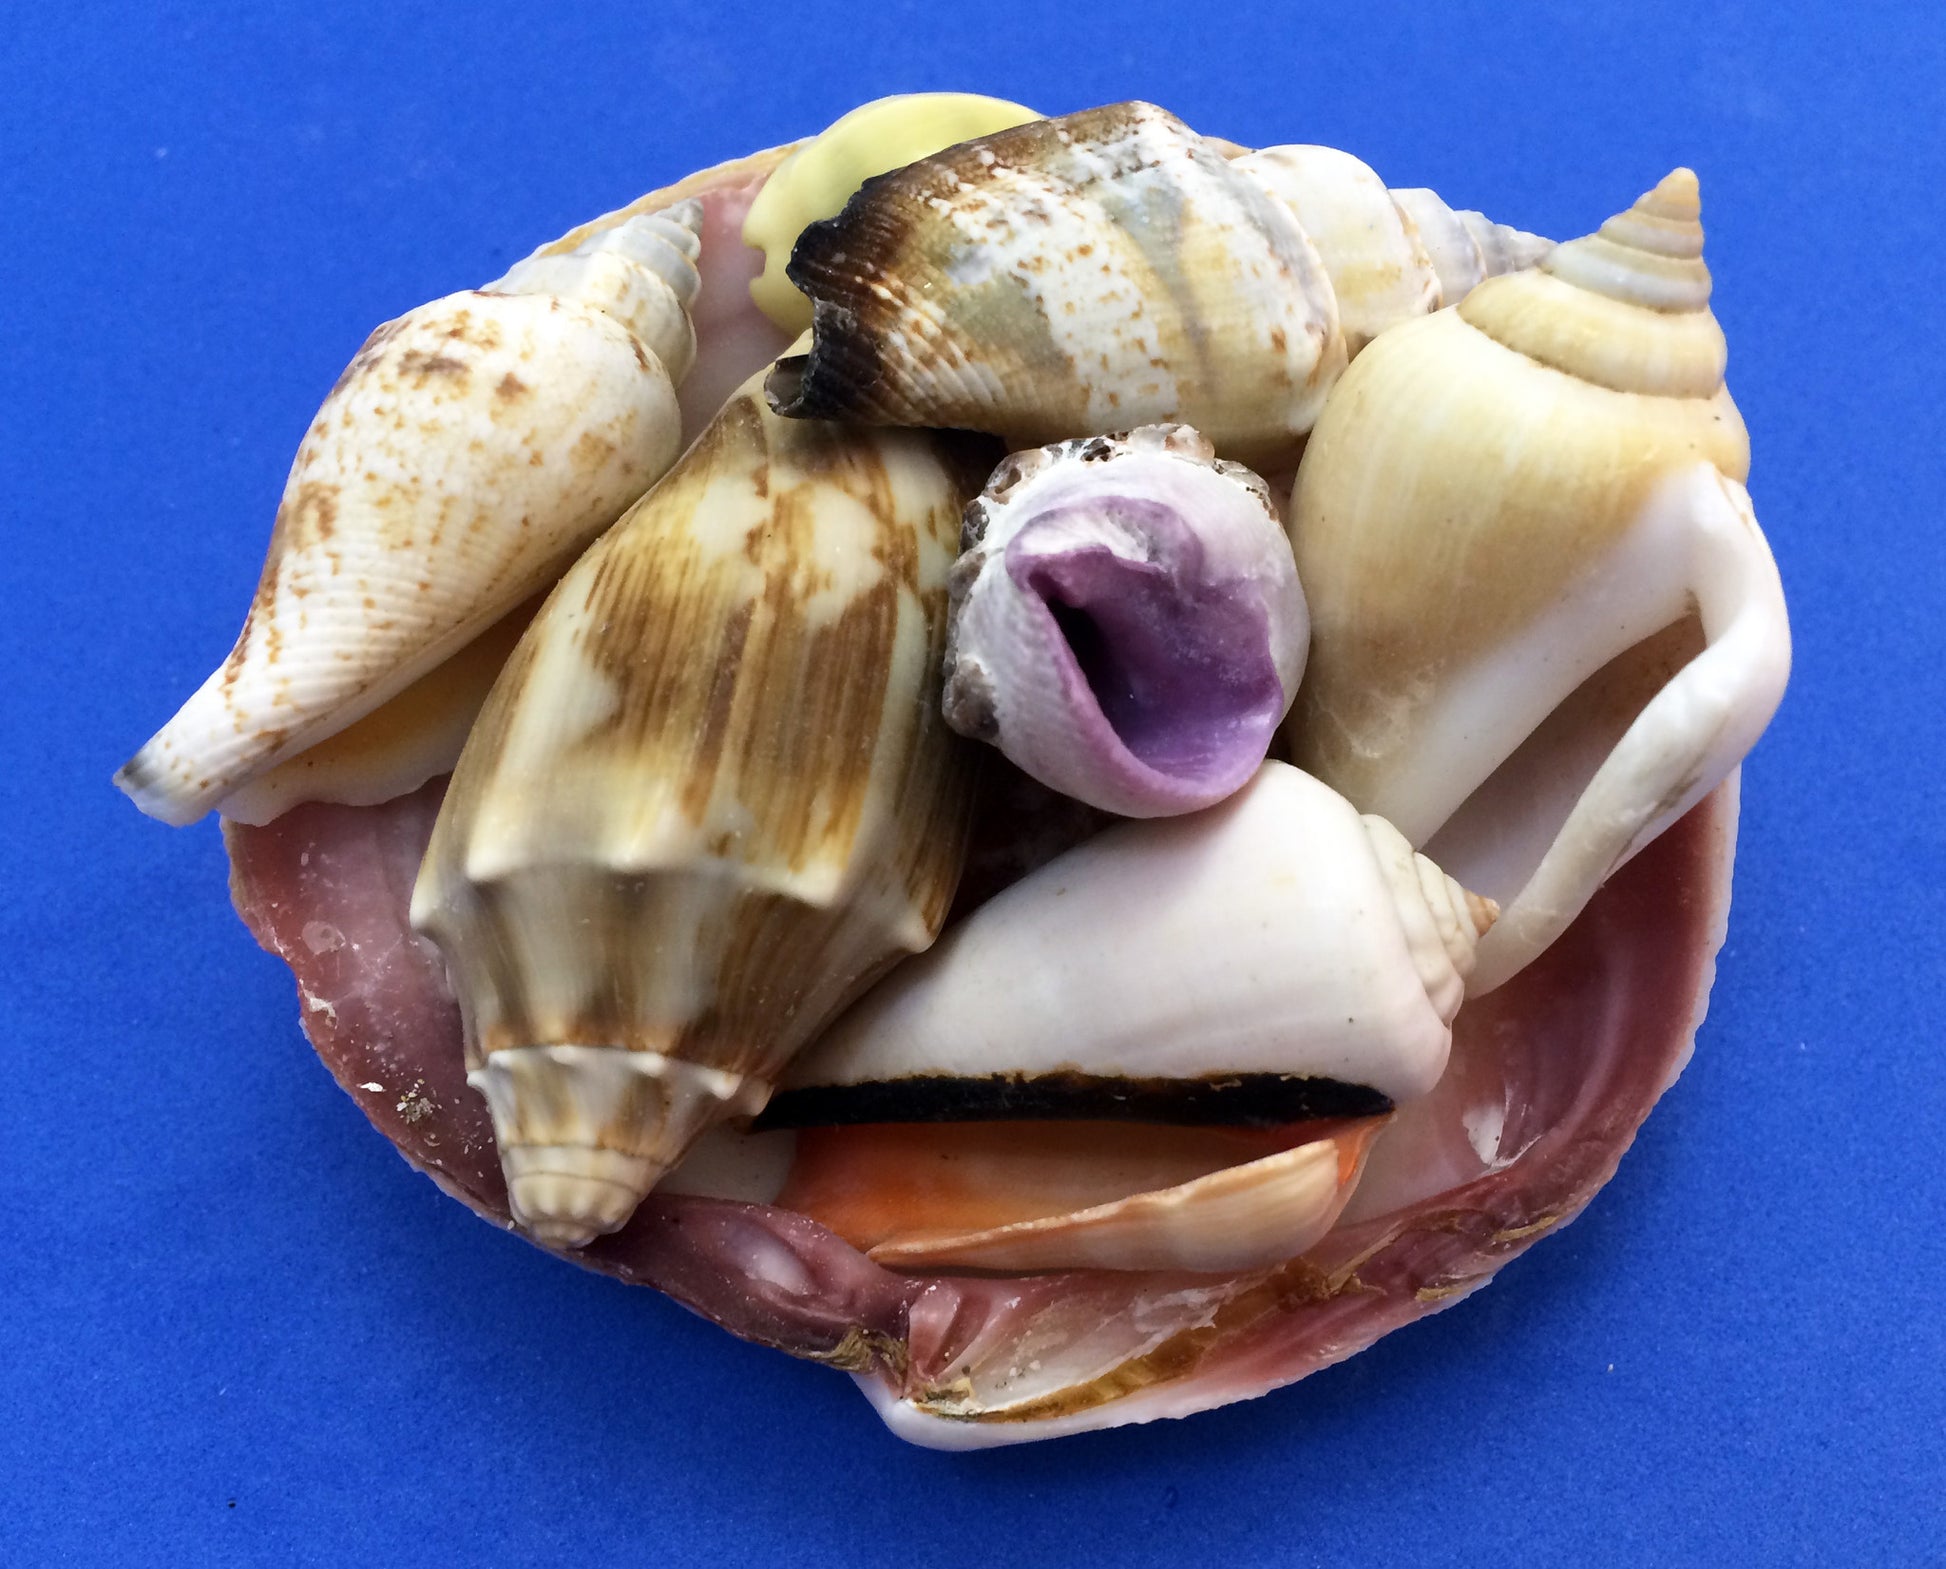 Science activity inspired by the book Over in an Ocean in a Coral Reef. Exploring seashells.